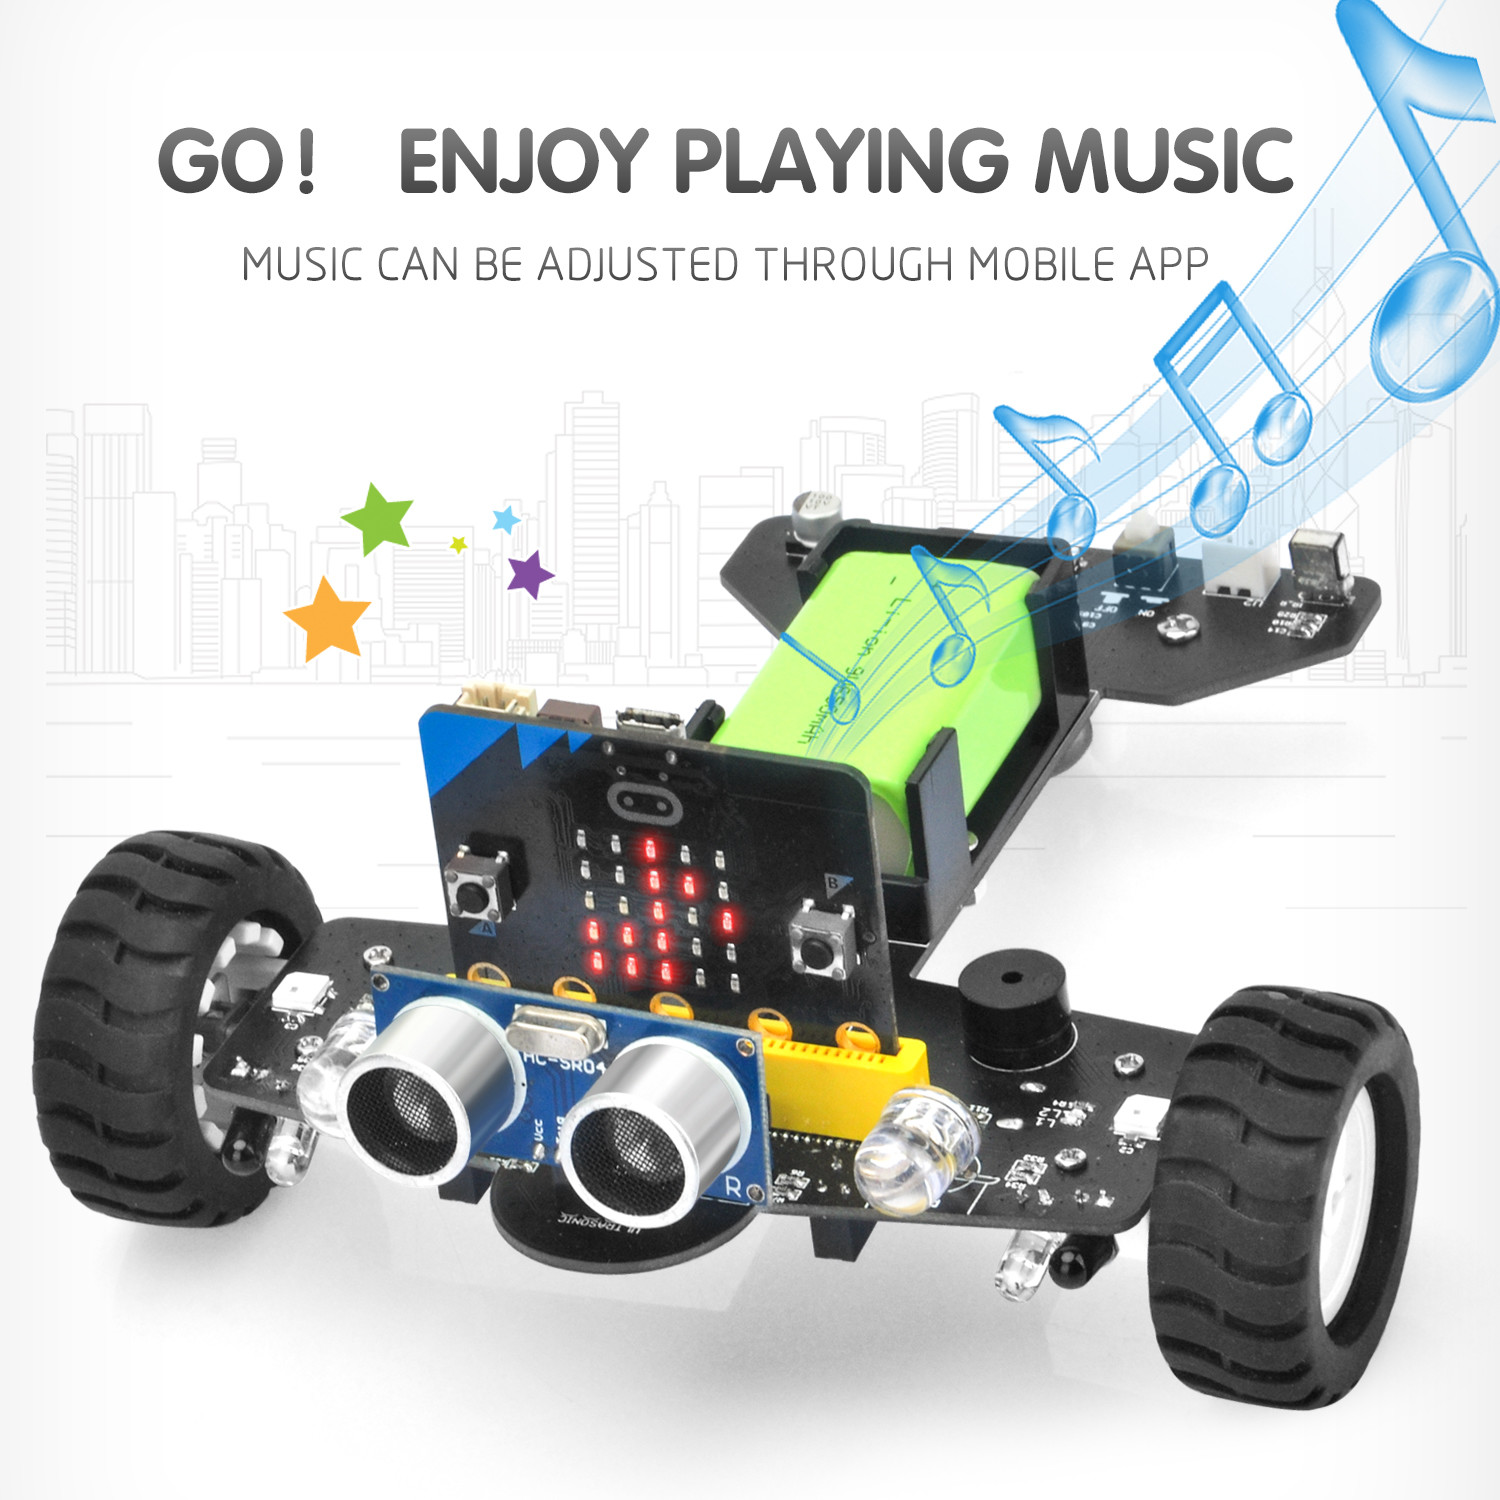 OSOYOO Robot Car for Micro Bit Lesson 8- Colorful music car